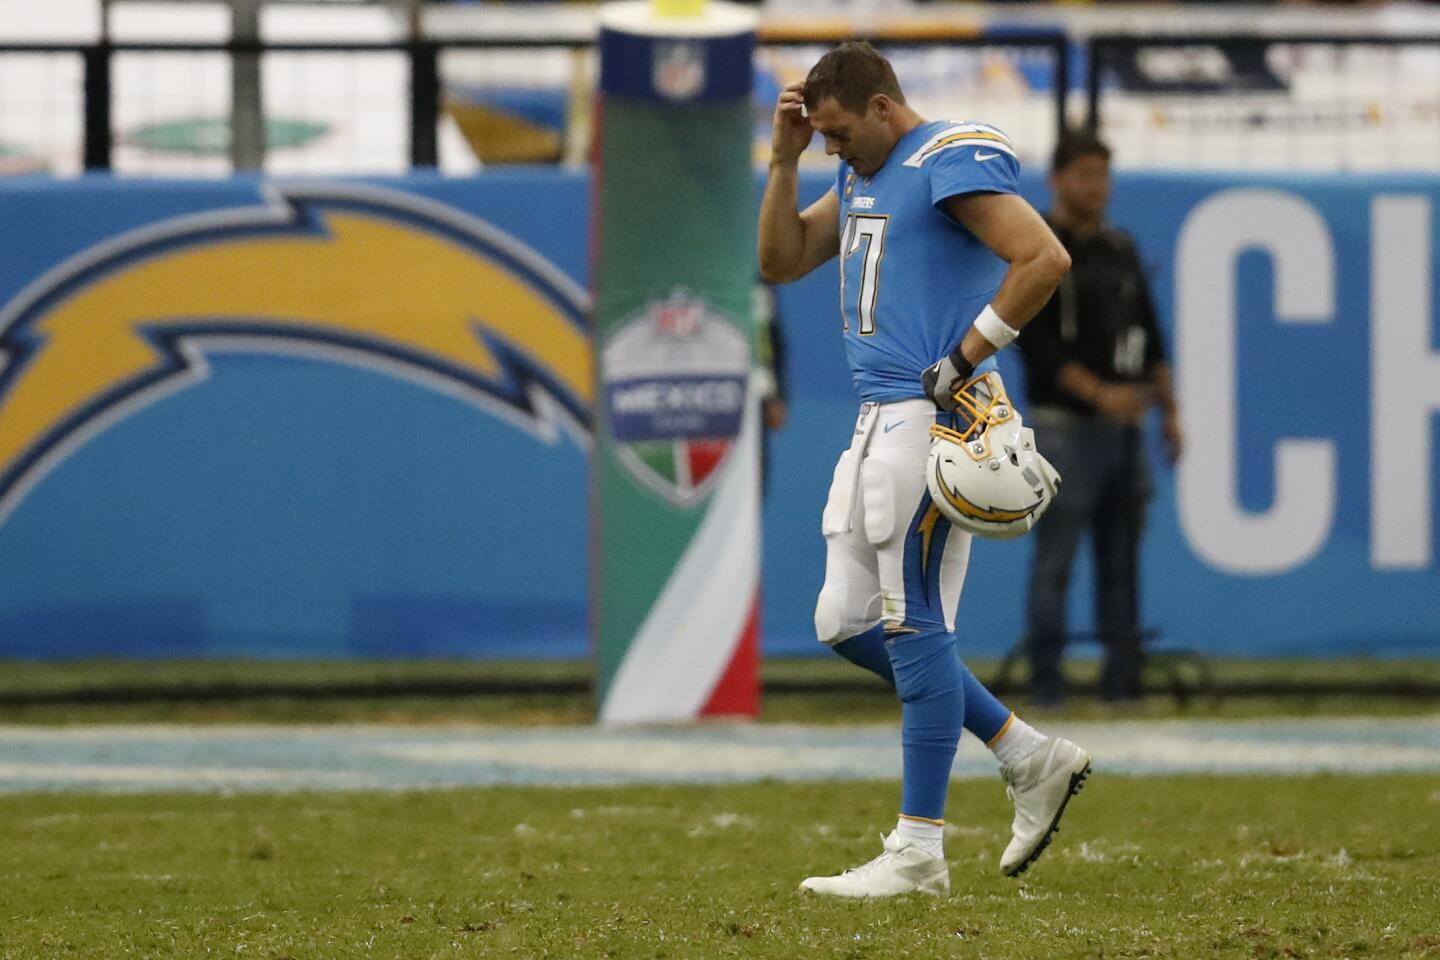 Chargers quarterback Philip Rivers walks off the field during the second half of a game against the Chiefs on Nov. 18.